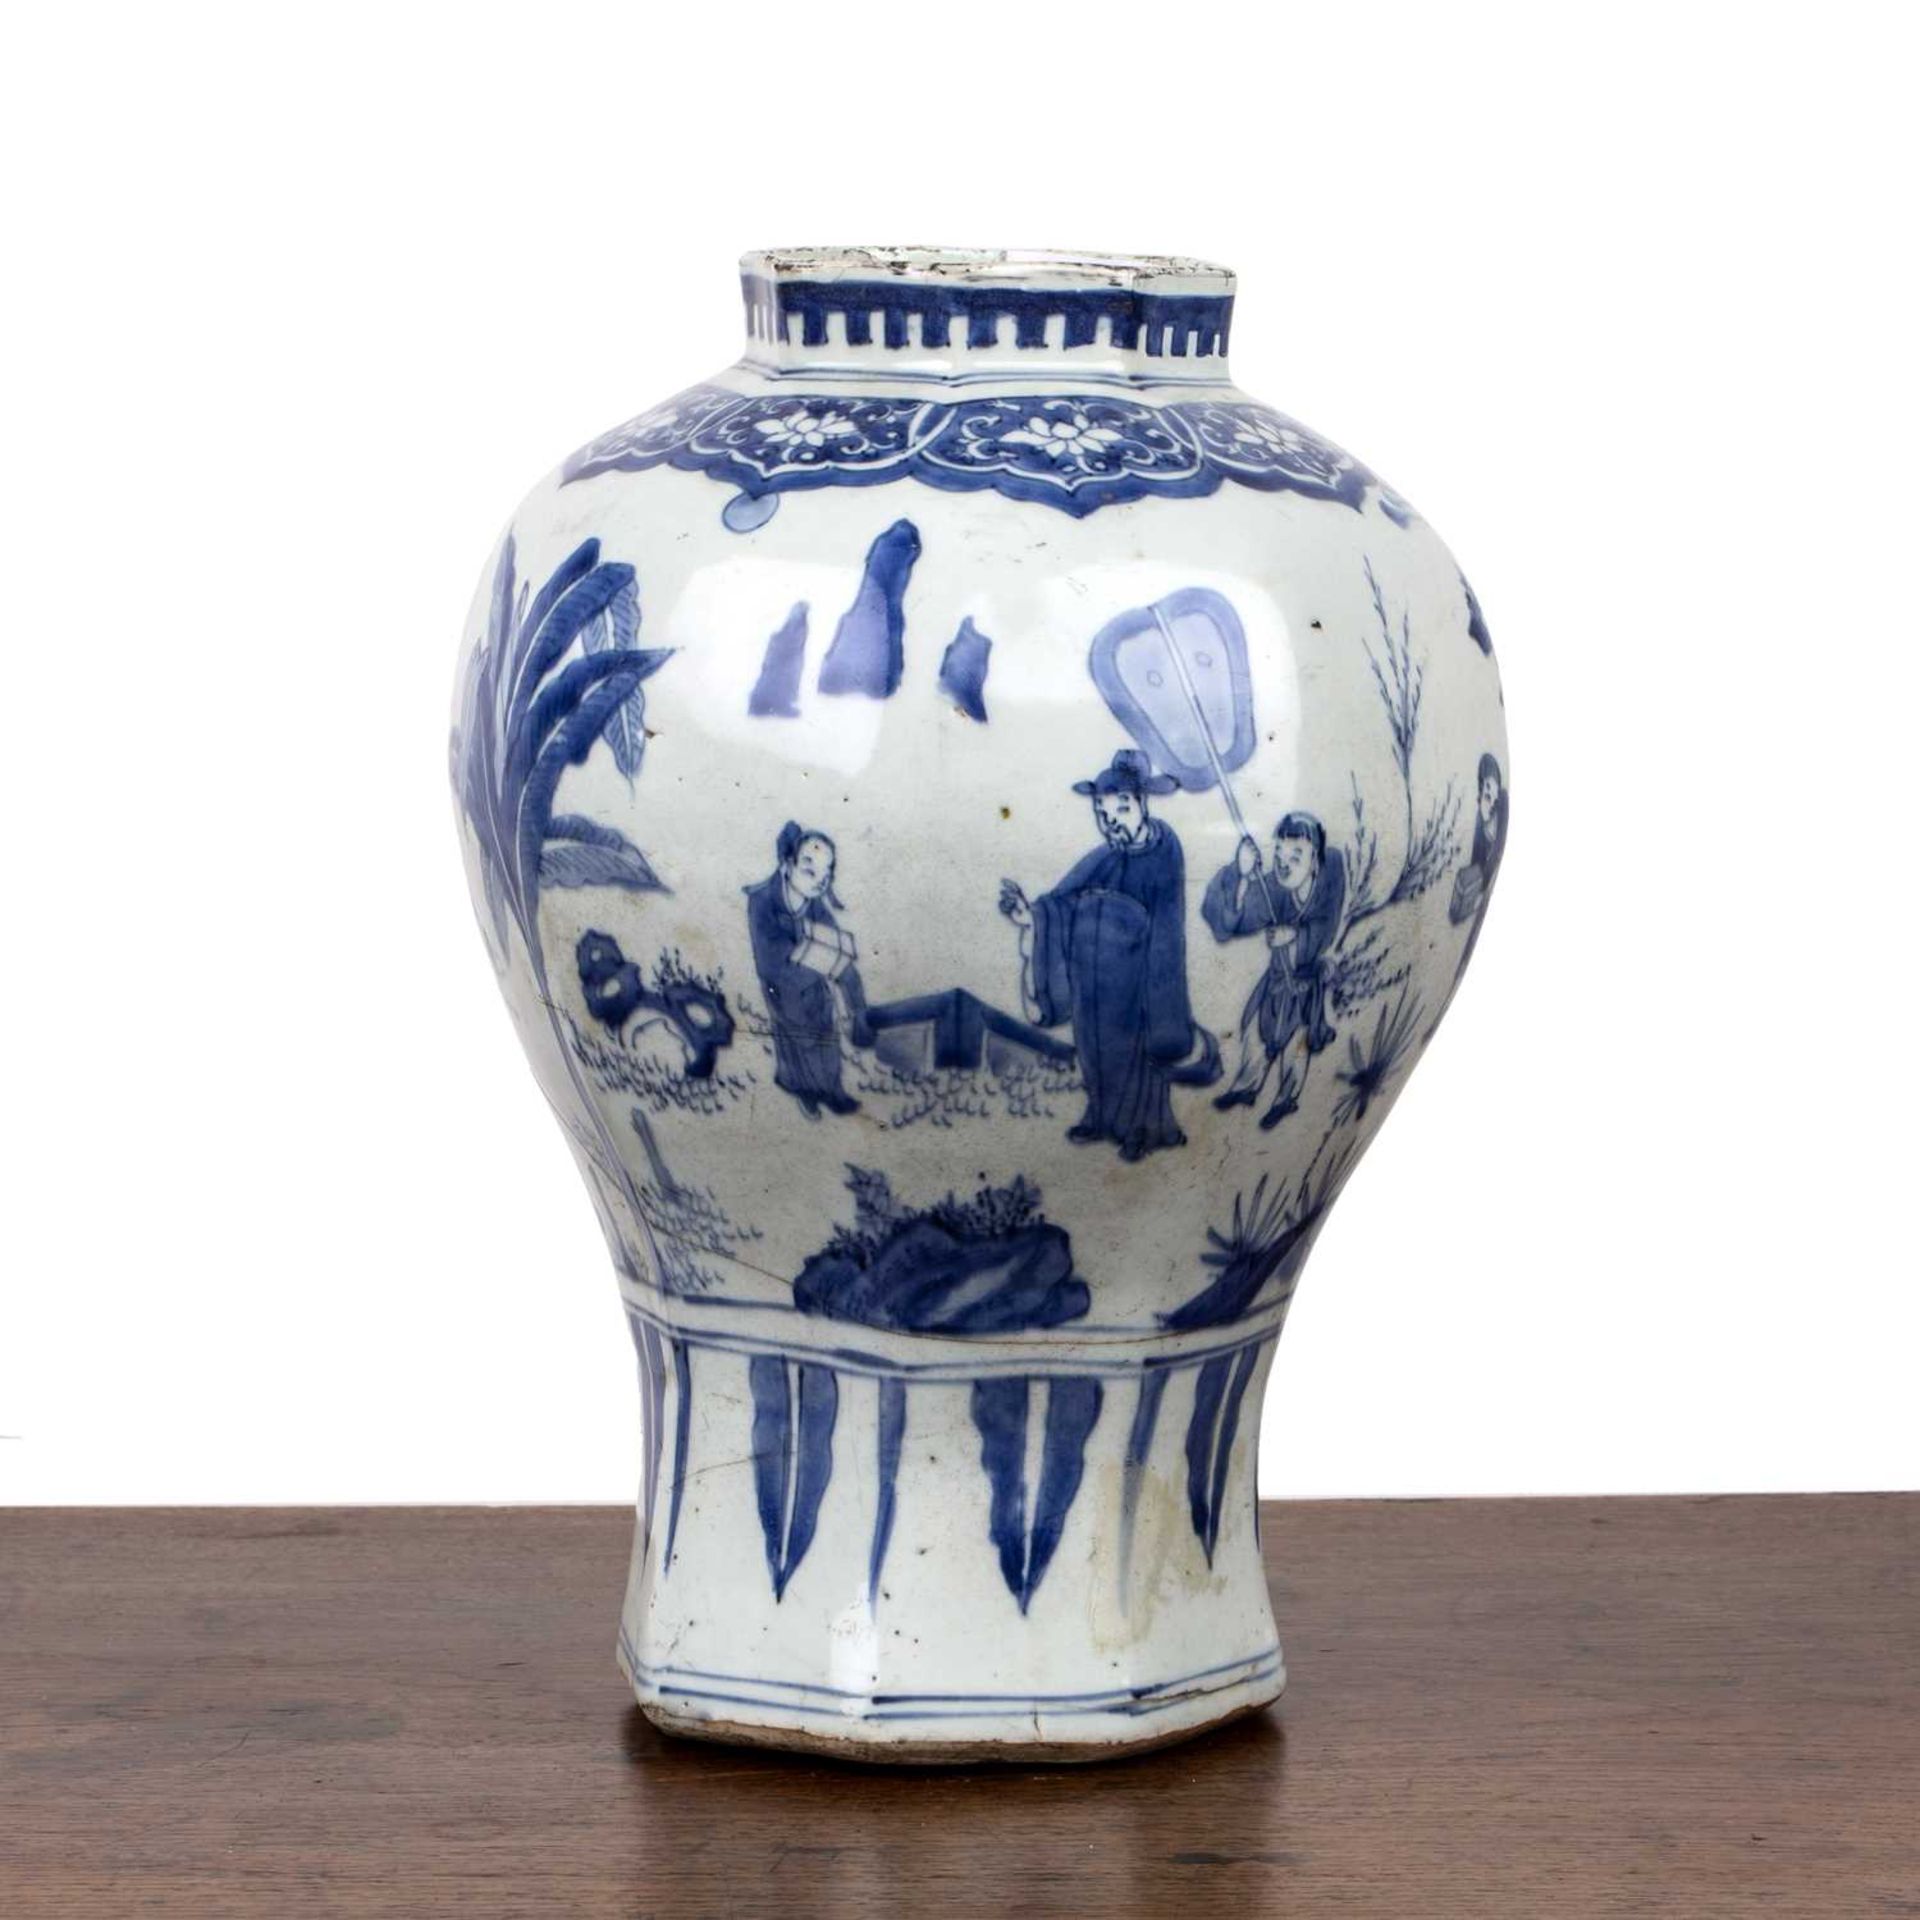 Blue and white baluster vase Chinese, early 18th Century painted with court figures within a ruyi